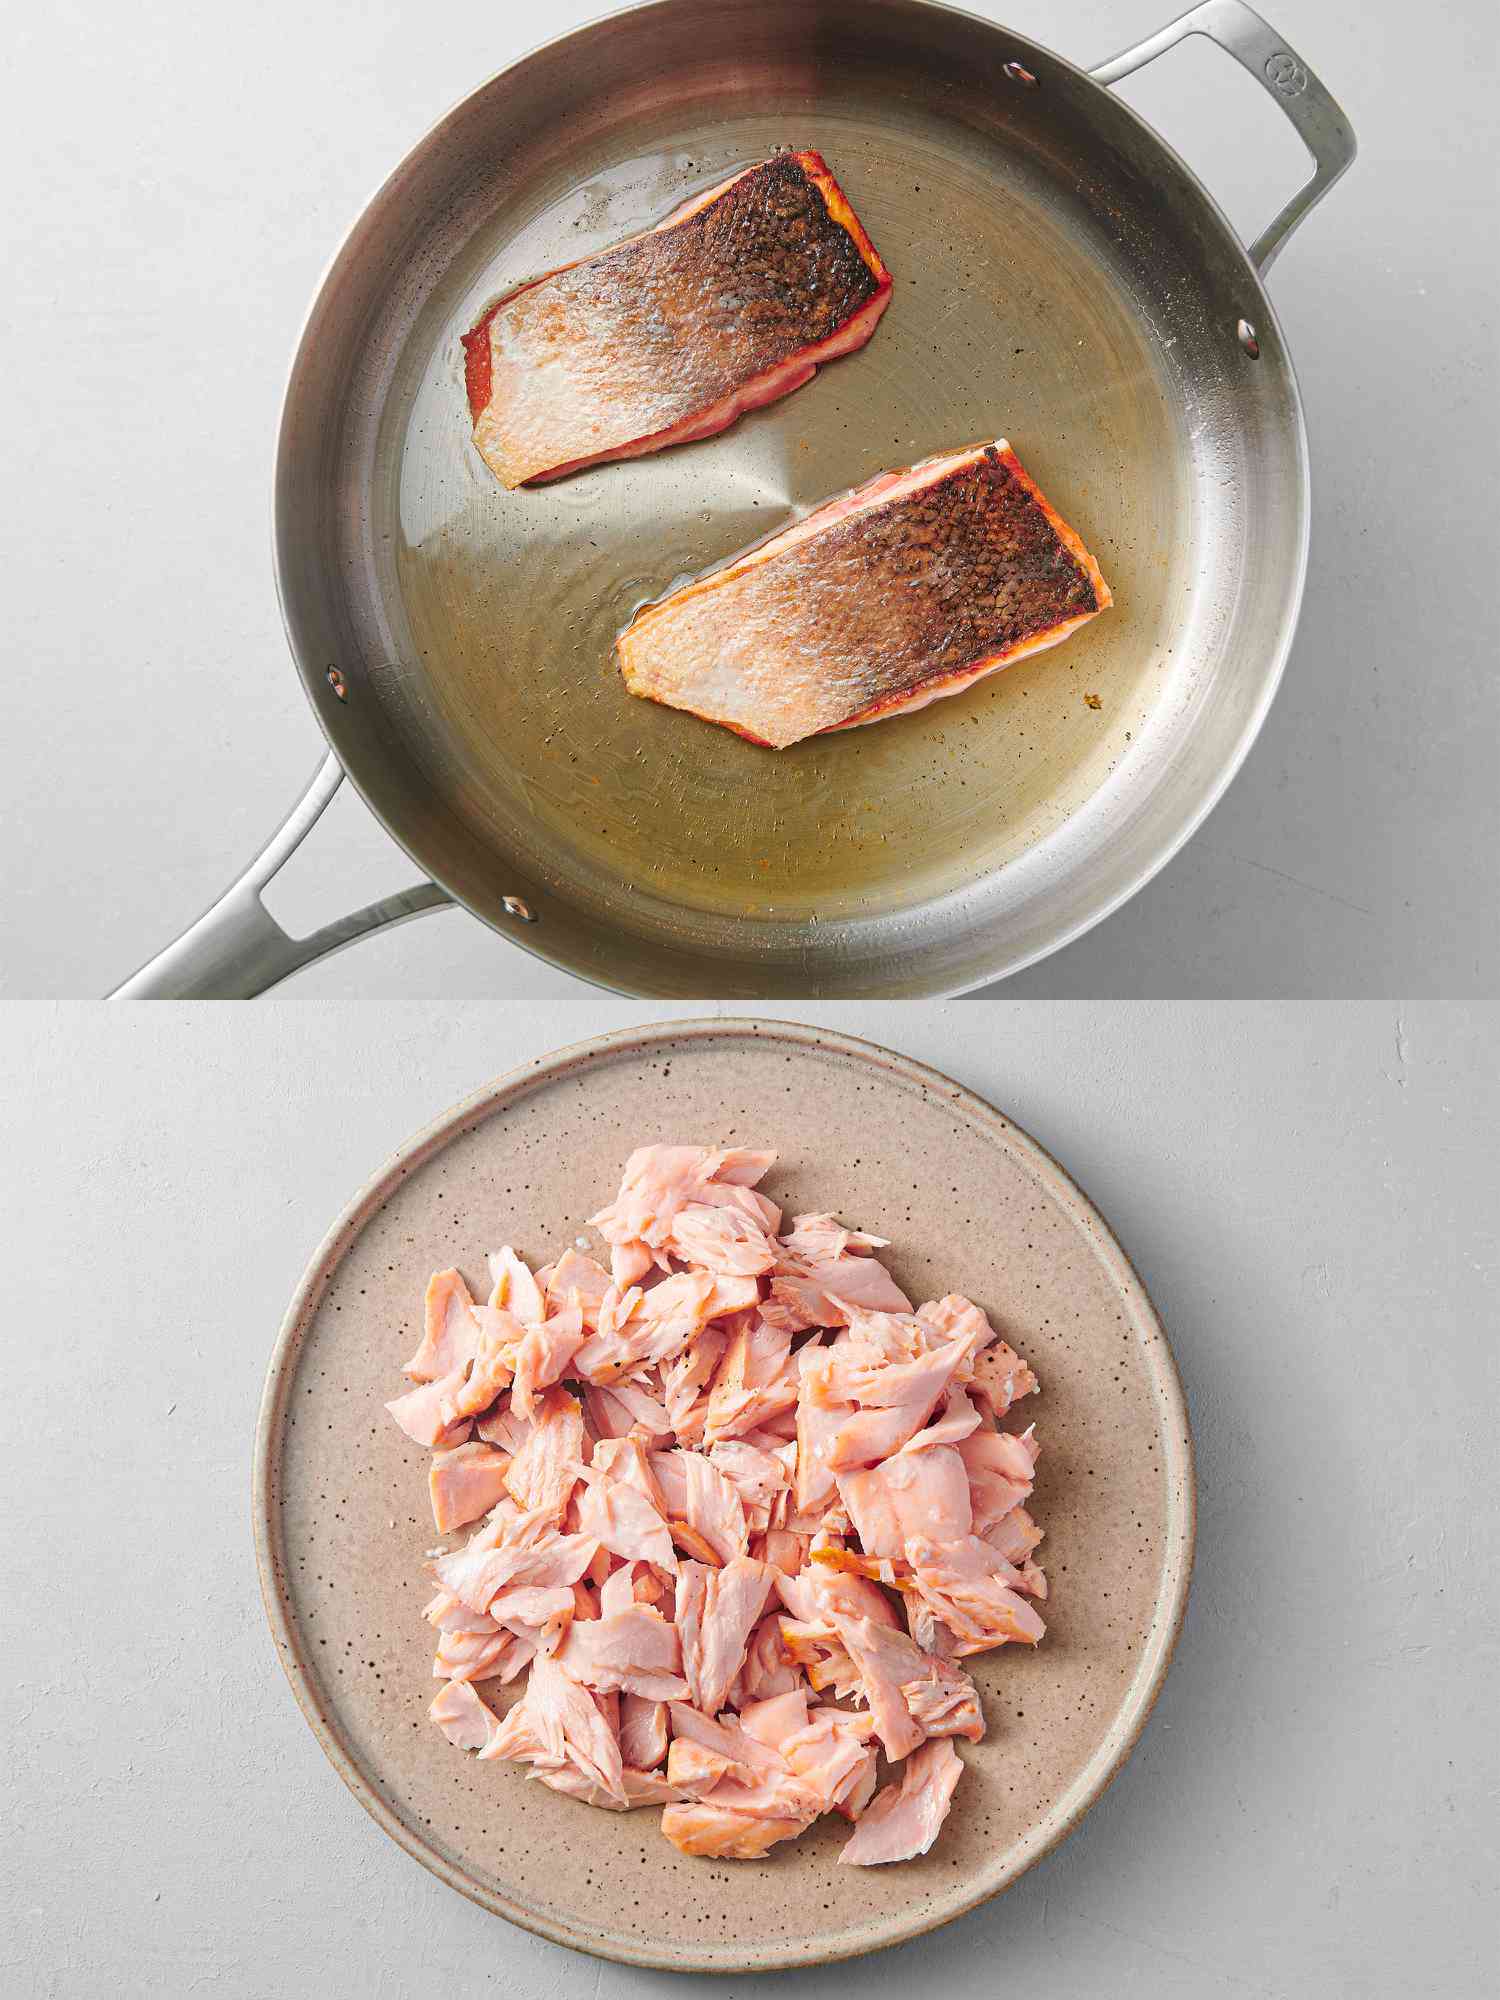 Salmon flipped over inside skillet and cooked, and cooled salmon flaked on plate, with skin discarded